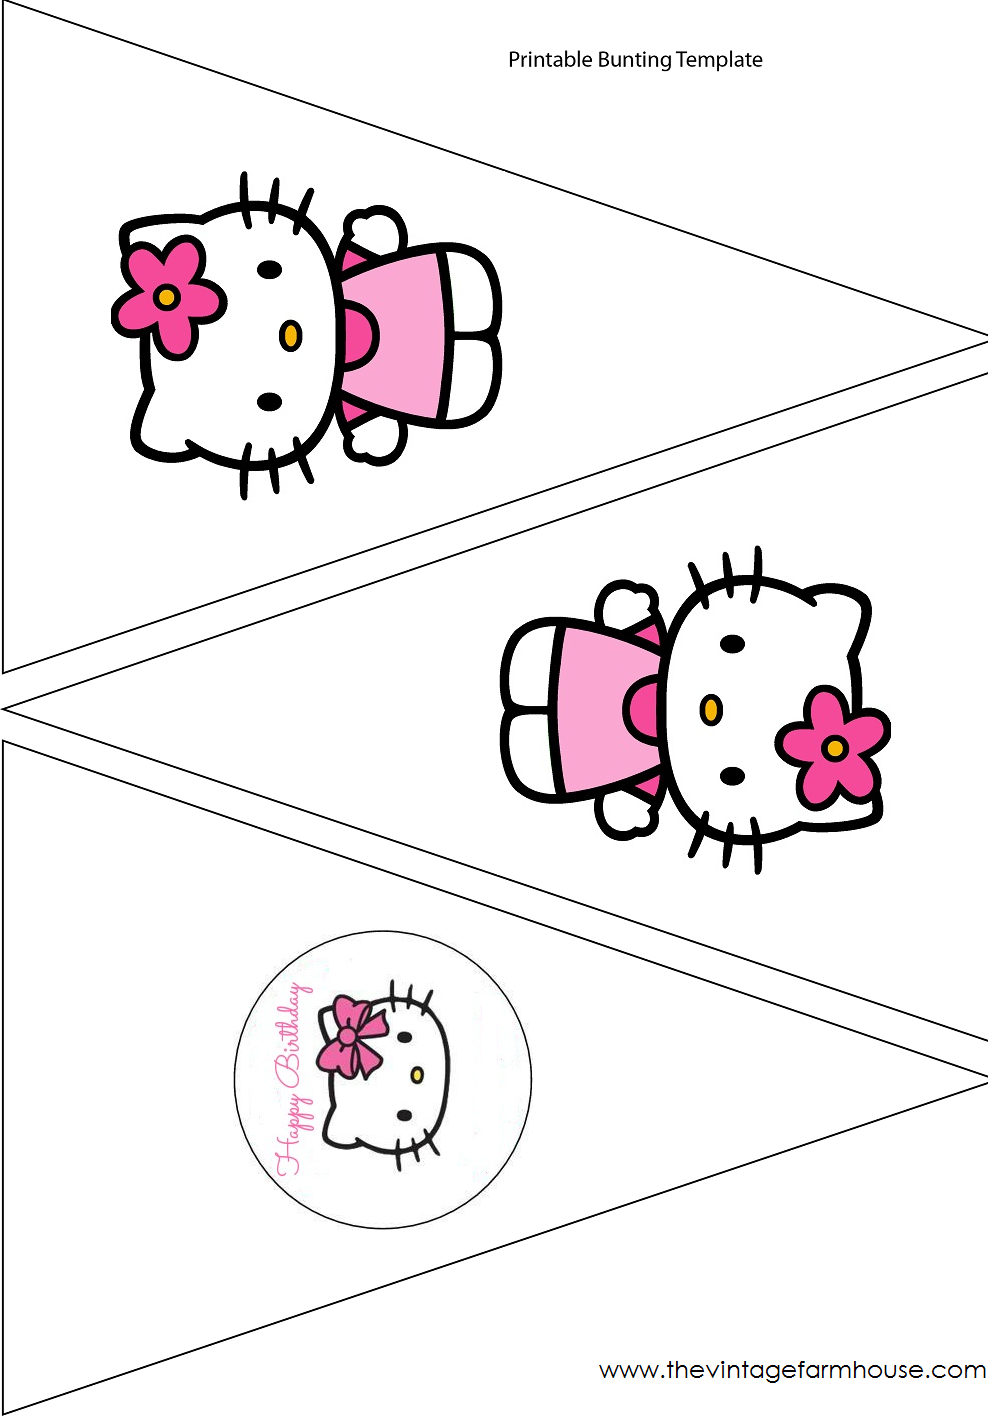 Simple Cute Hello Kitty Free Printable Kit. - Oh My Fiesta With Hello Kitty Birthday Banner Template Free